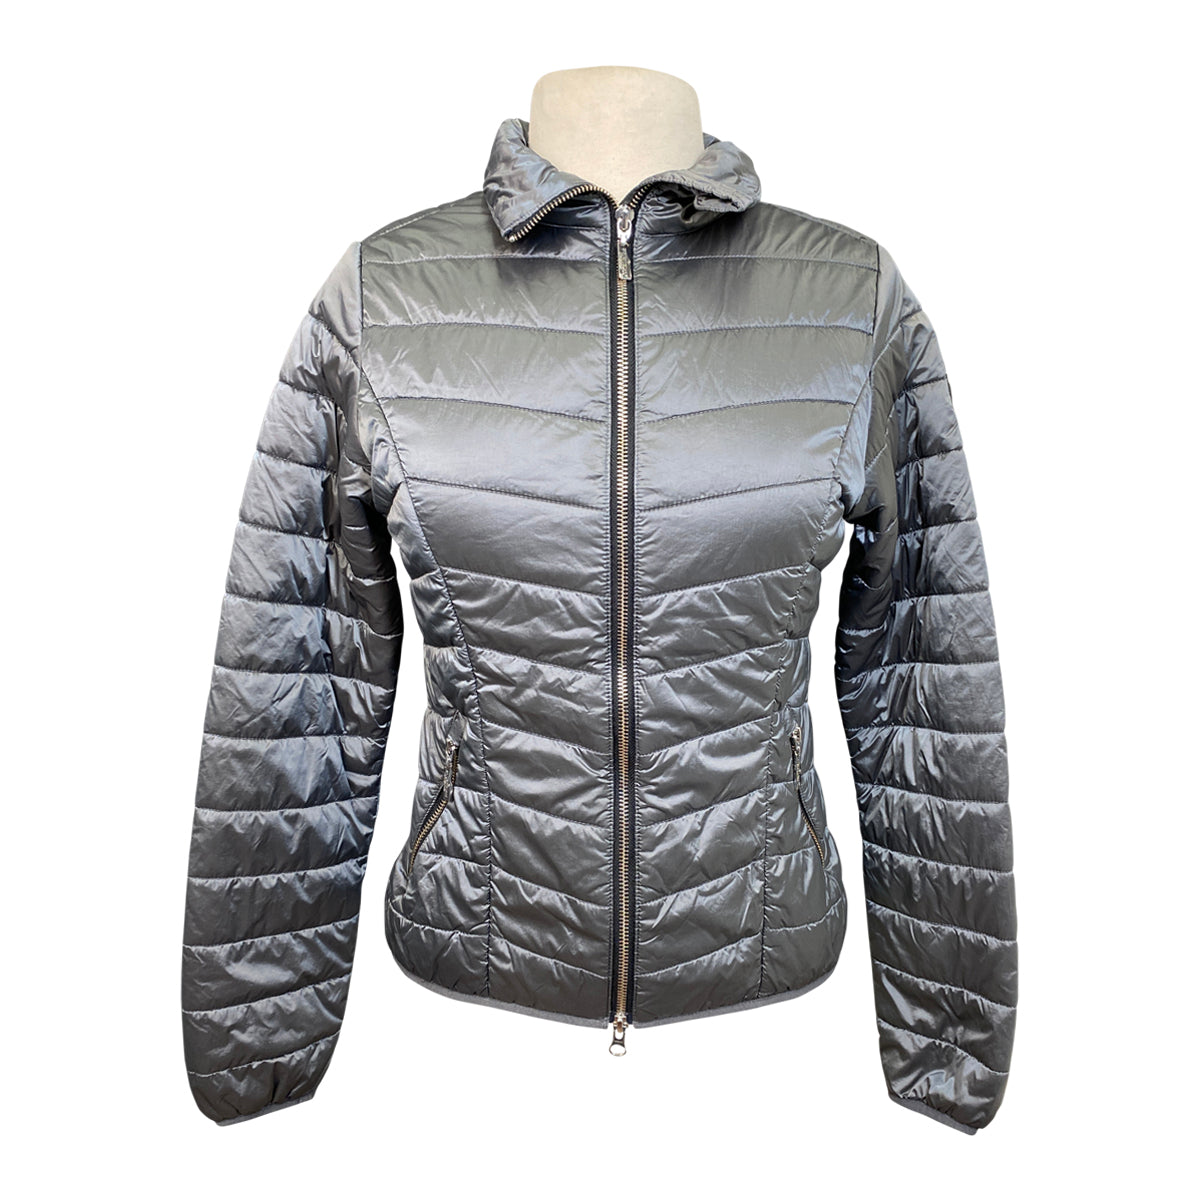 Equestrian Stockholm Light Weight Jacket  in Silver